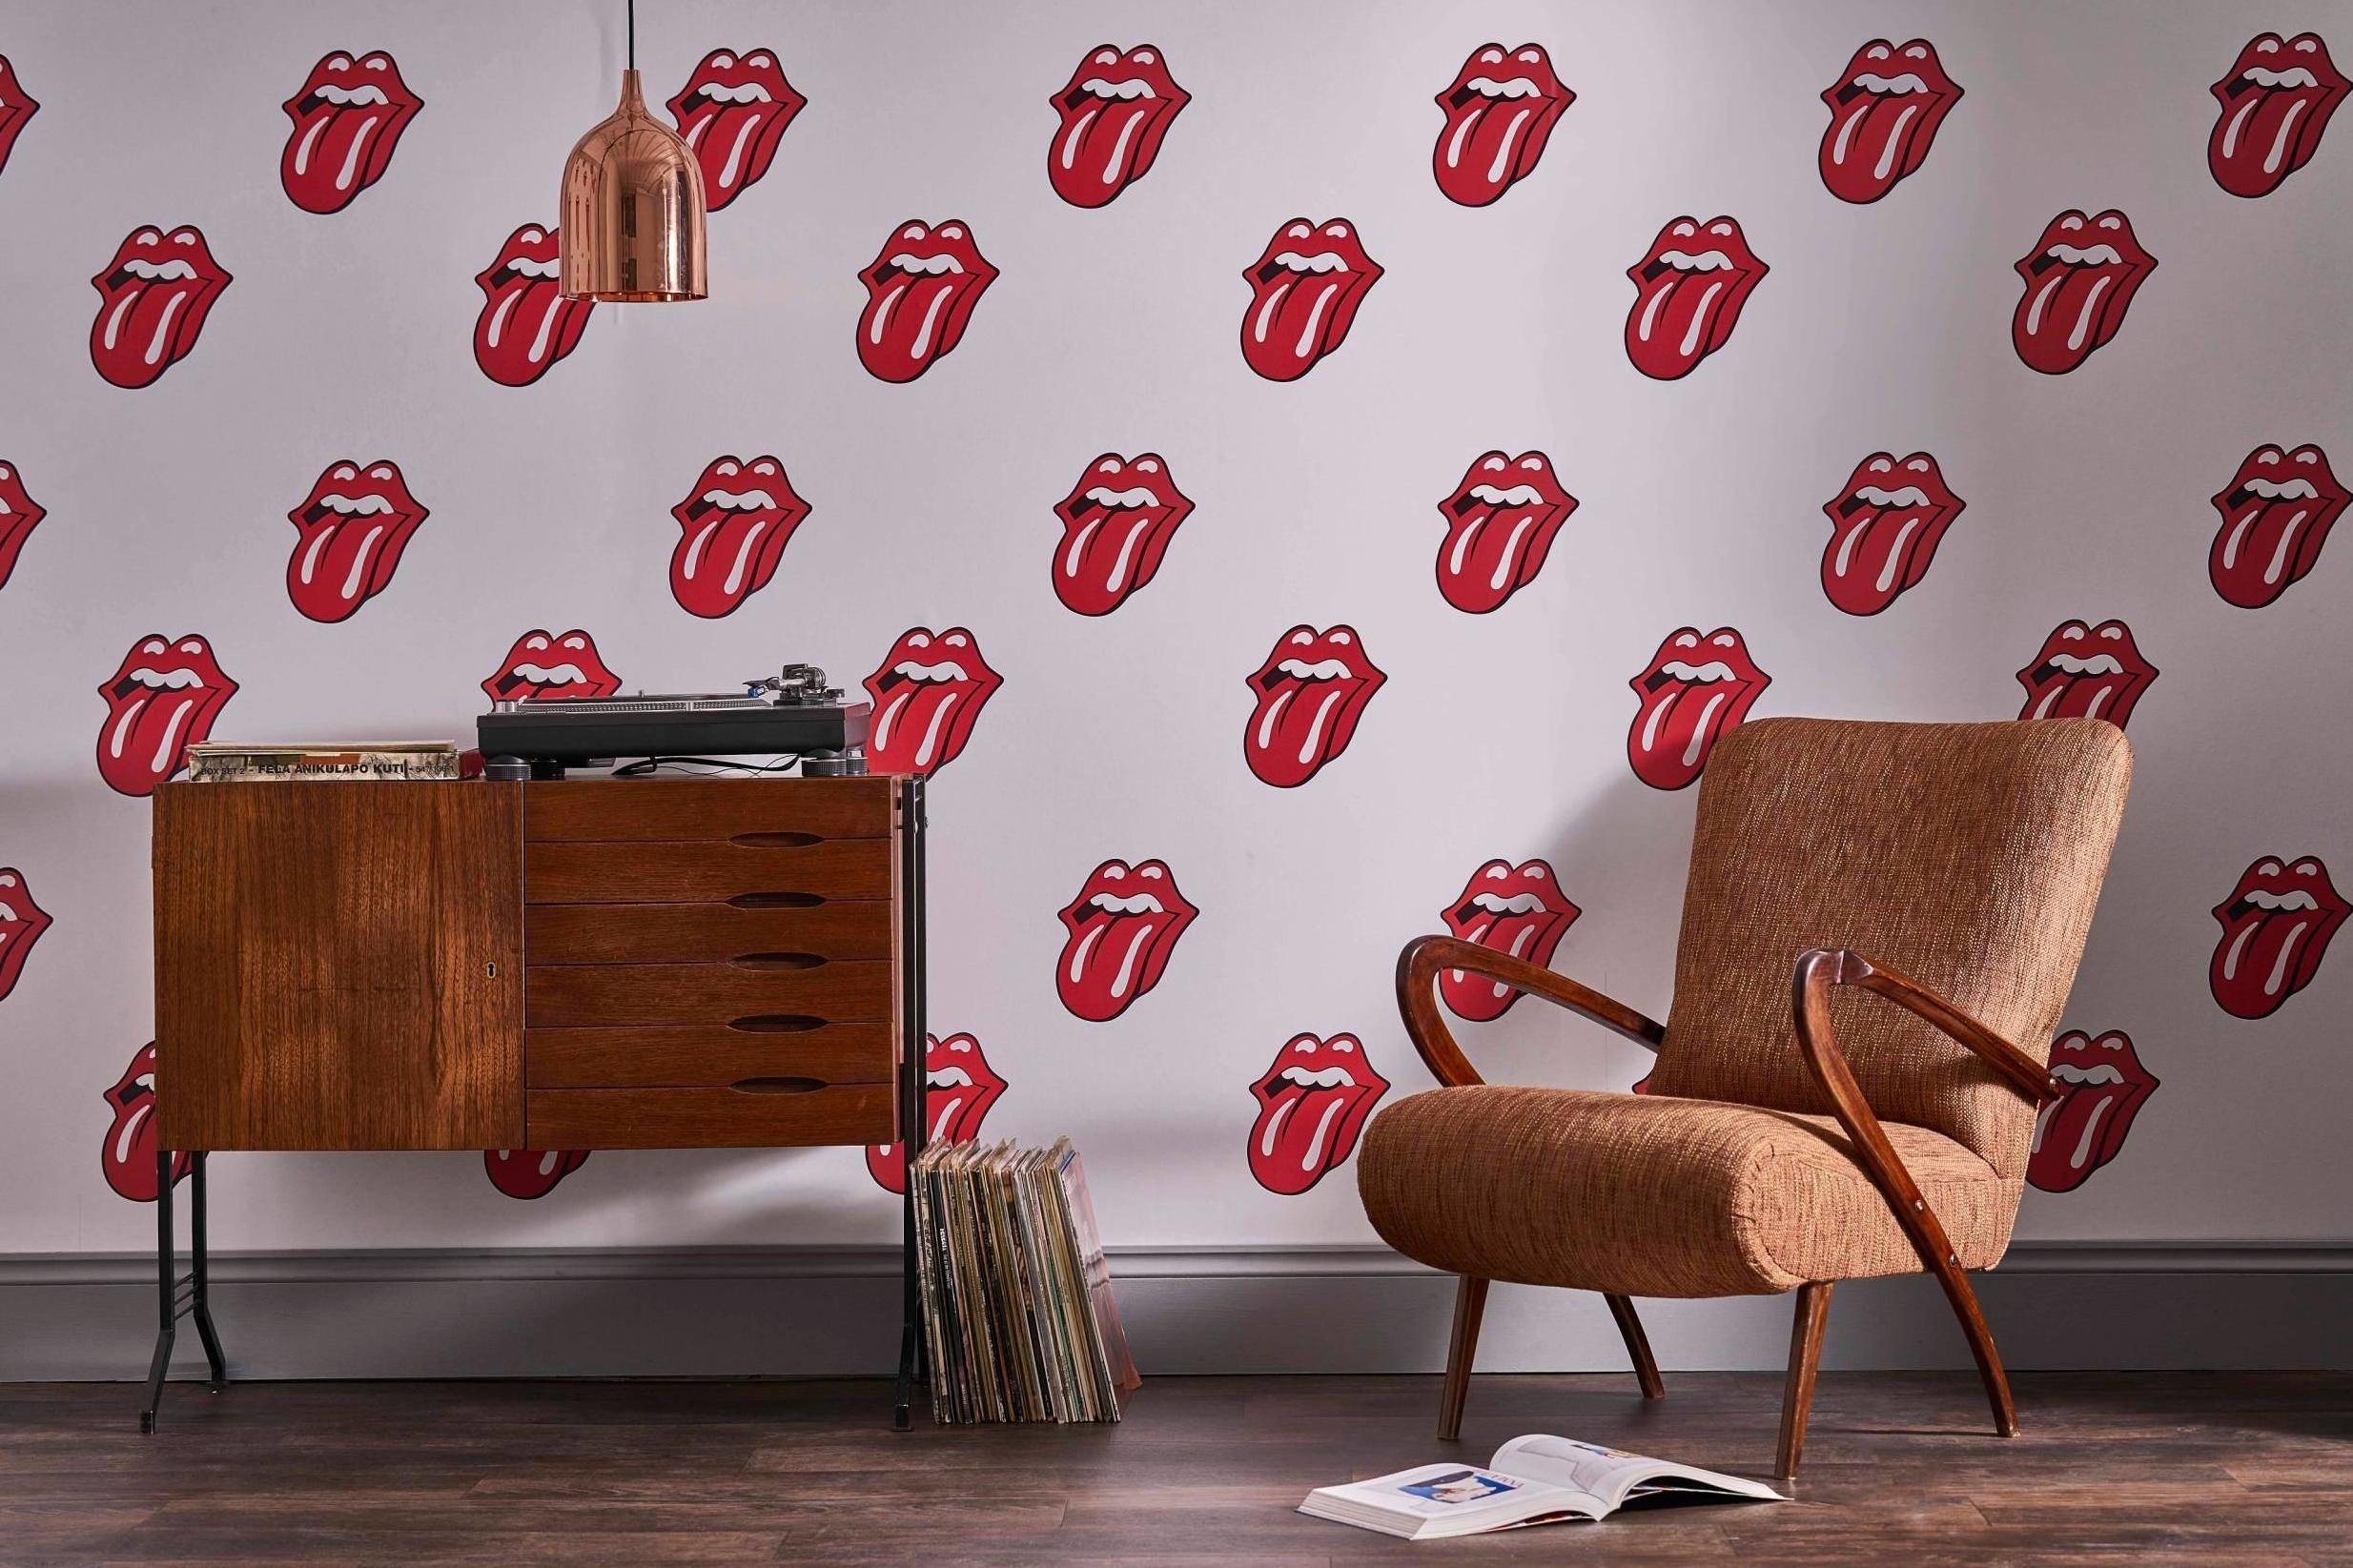 2468x1645, Iconic Style - Tongue Rolling Stones Lamp - HD Wallpaper 